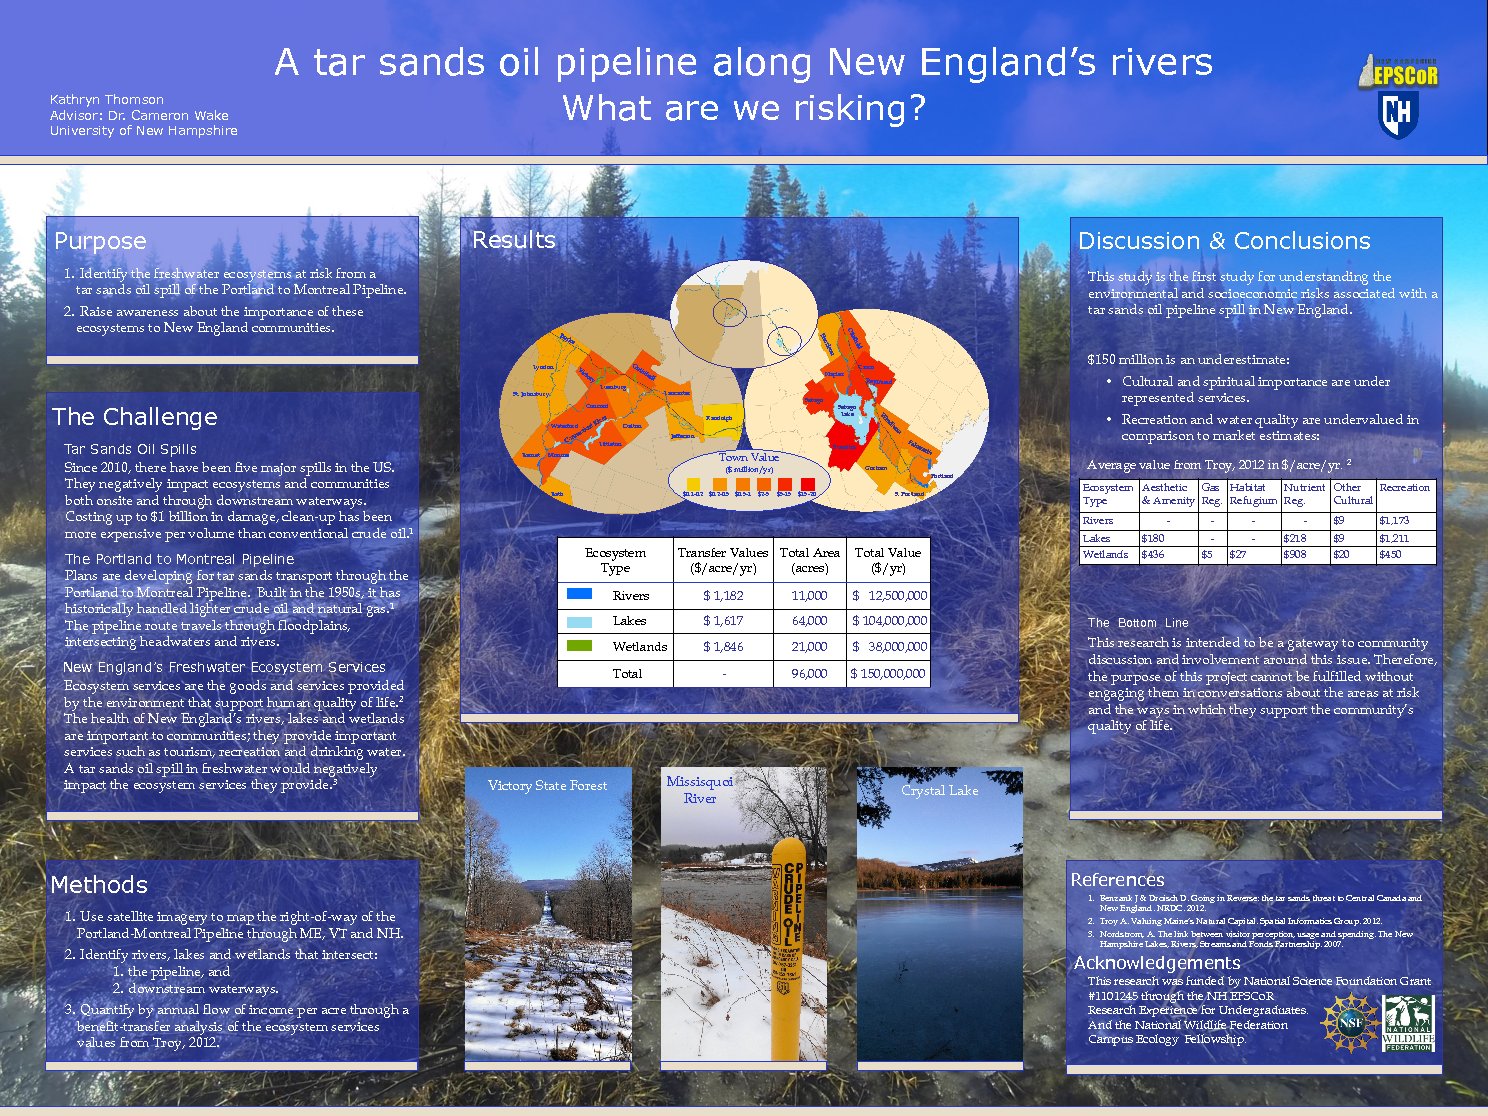 A Tar Sands Oil Pipeline Along New England's Rivers - What Are We Risking? by kpb39